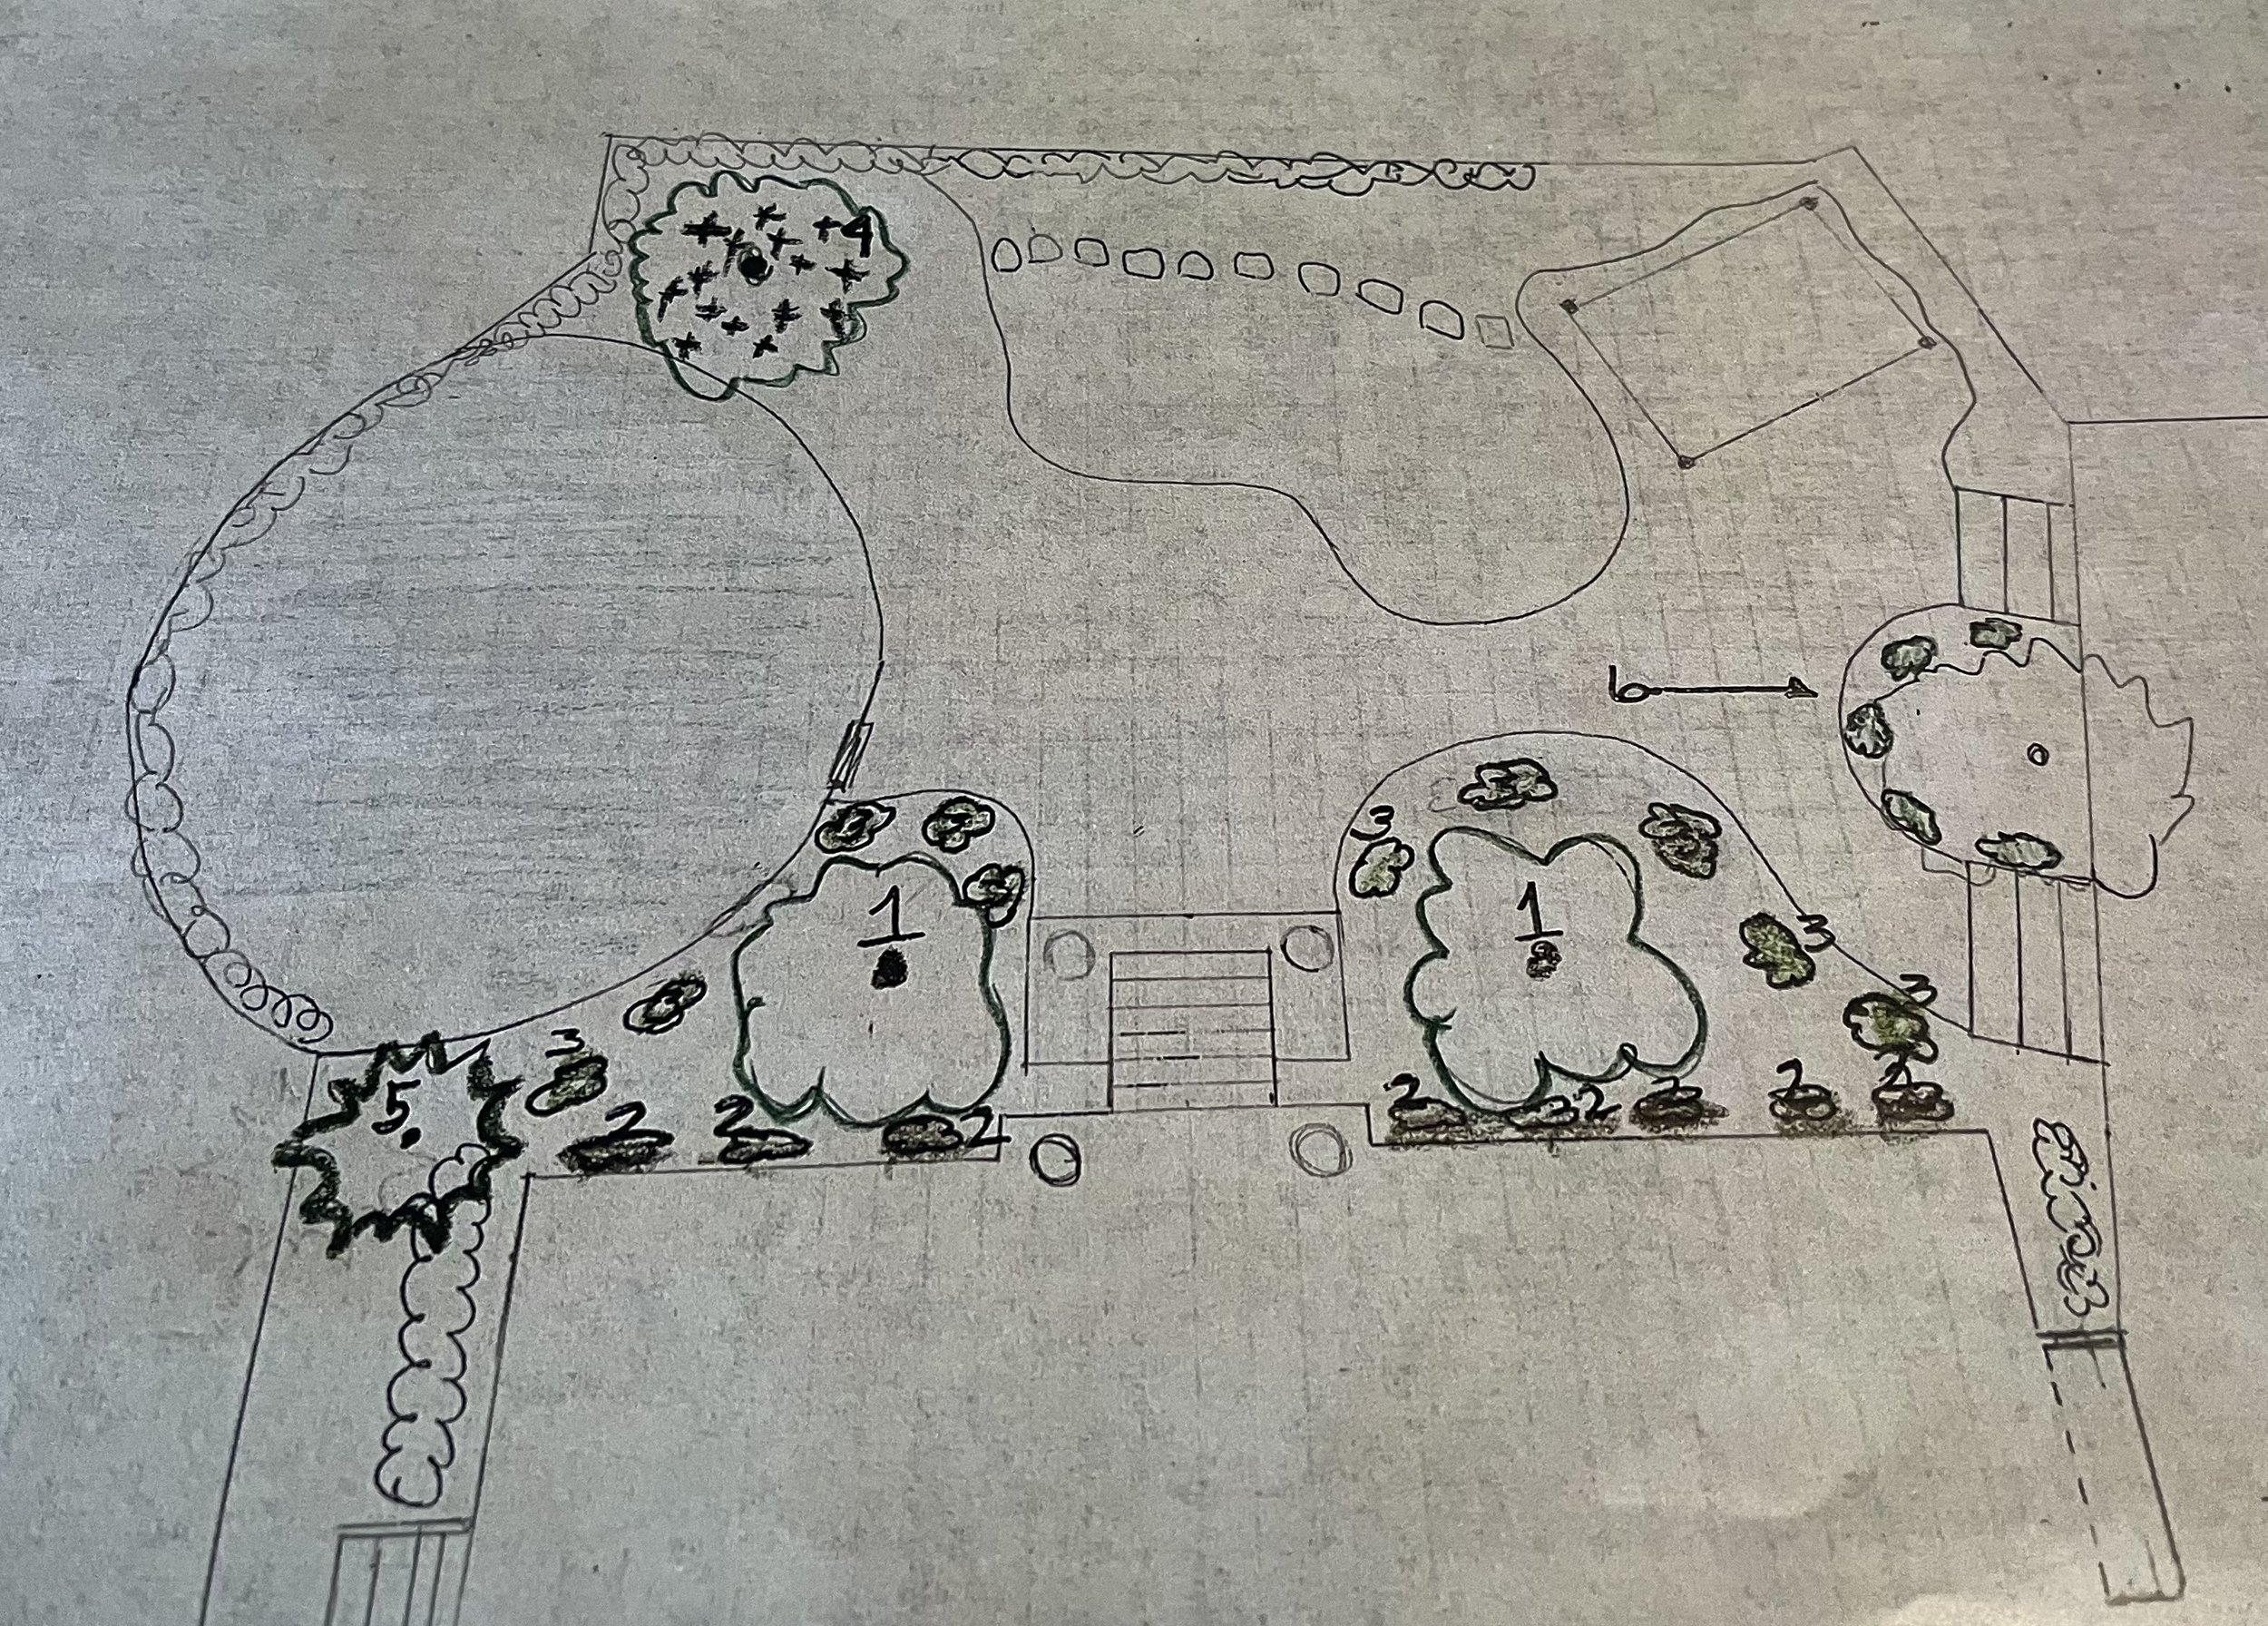  A hand drawn plan for an outdoor space with many plants along the borders. 